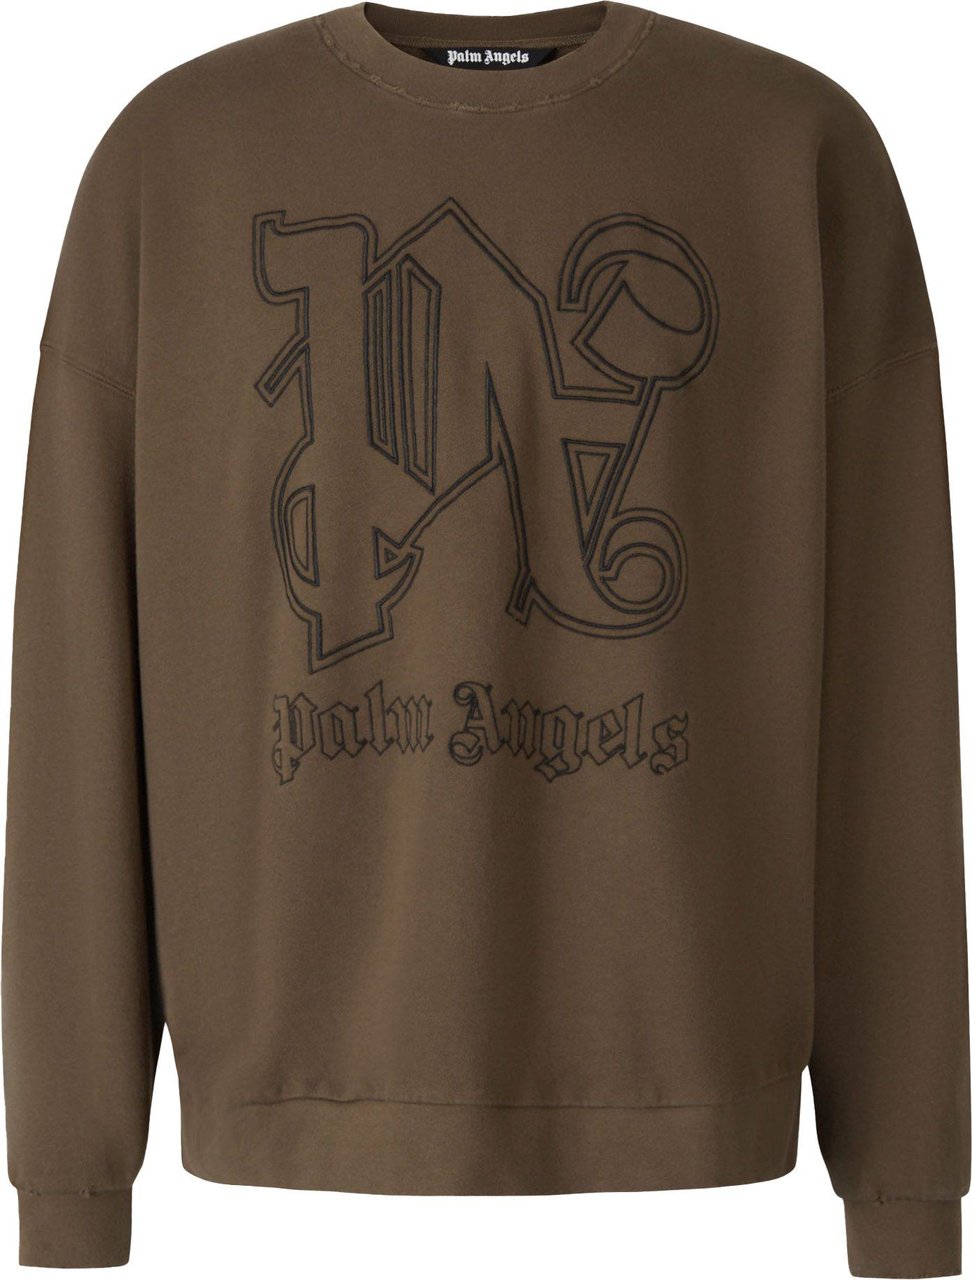 Palm Angels Embroidered Logo Sweatshirt Taupe